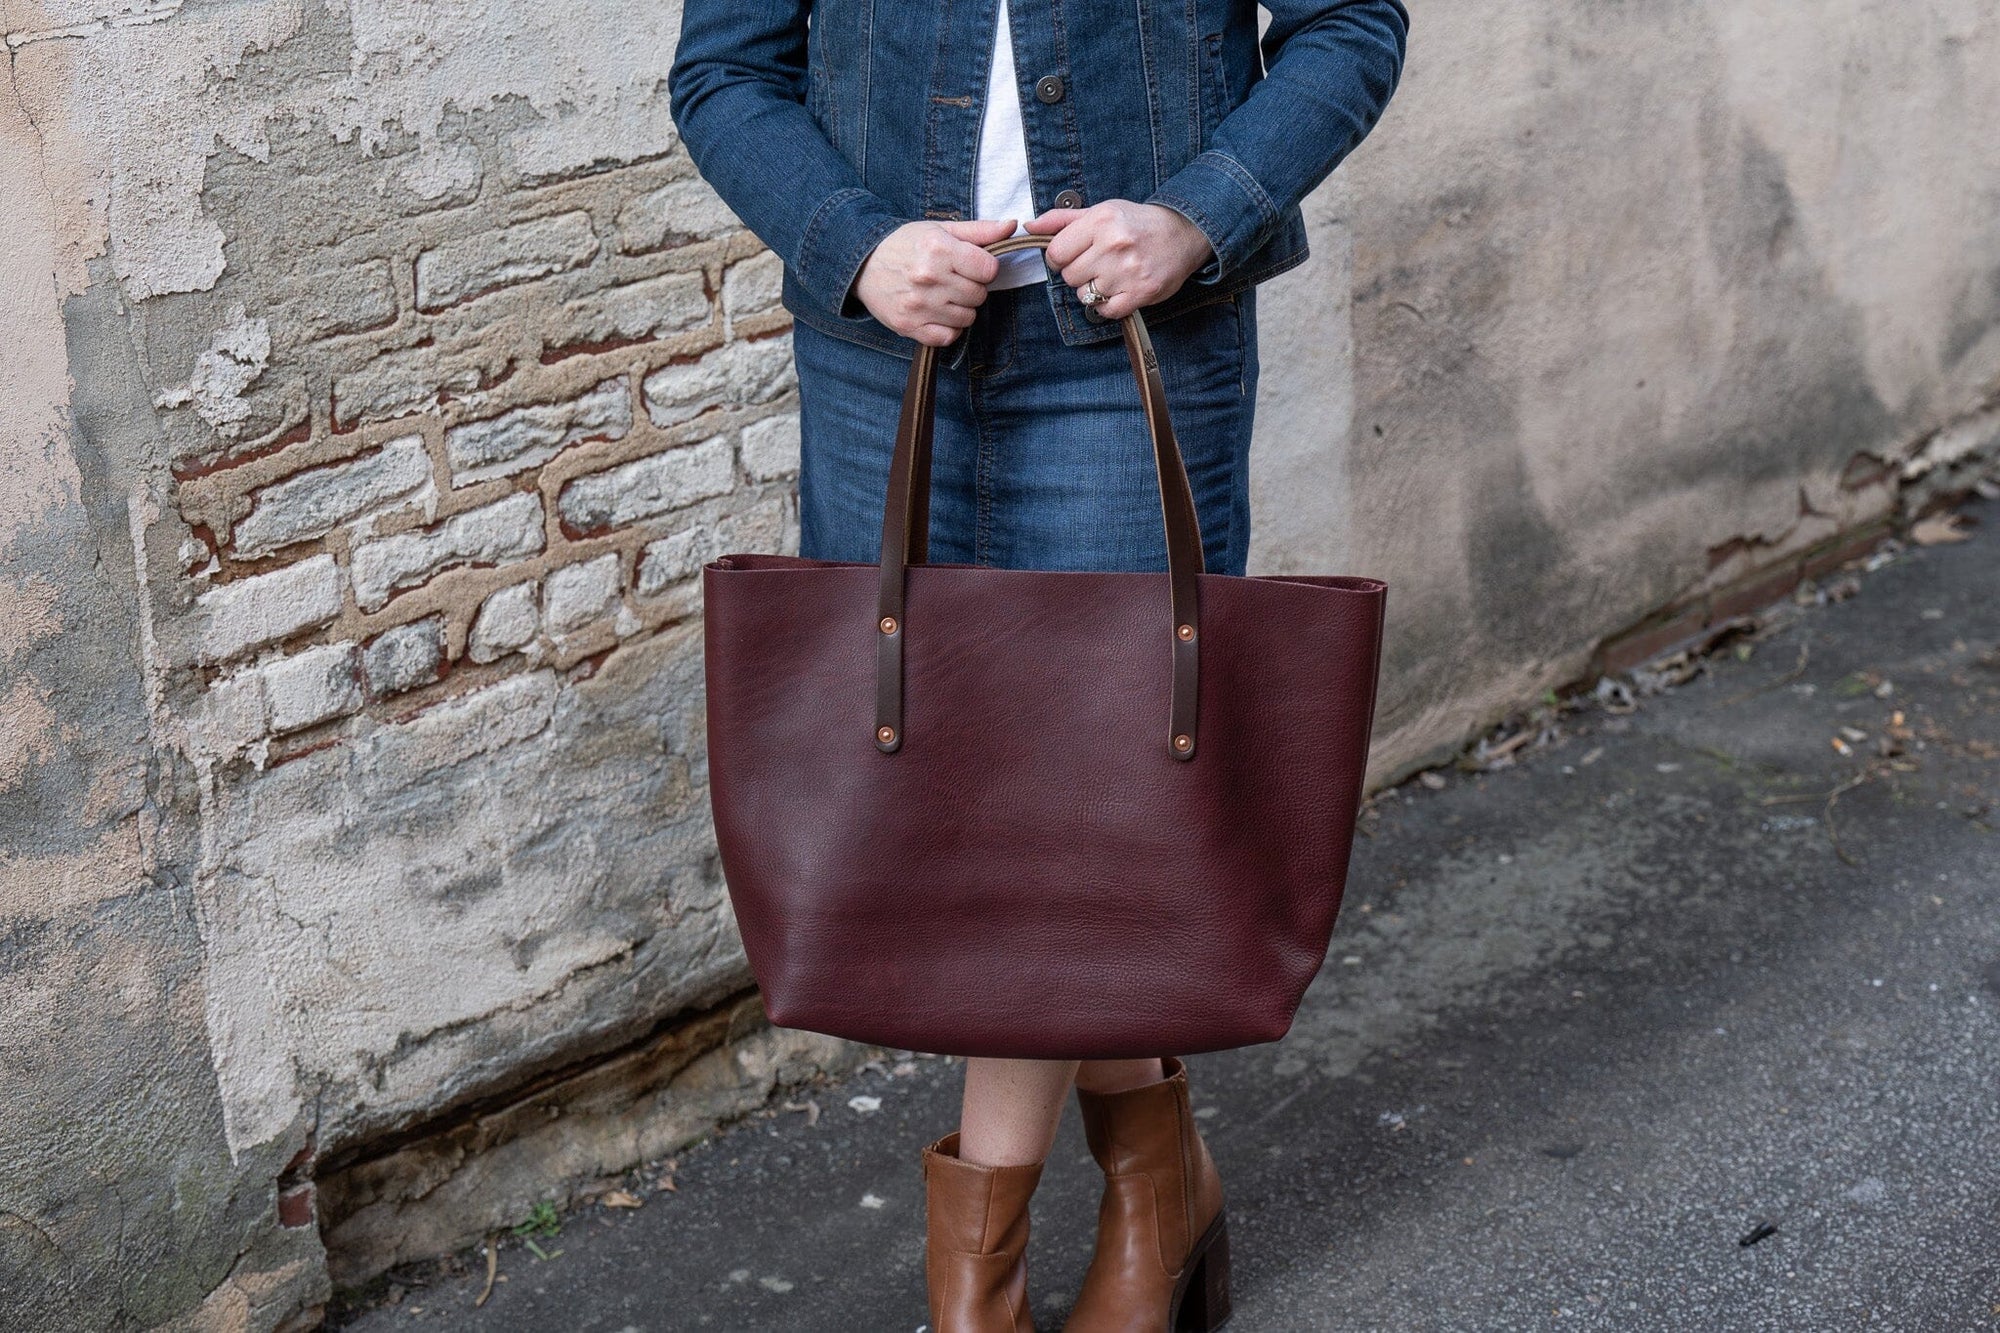 Women's Handmade Leather Tote Bags  Go Forth Goods - Go Forth Goods ®